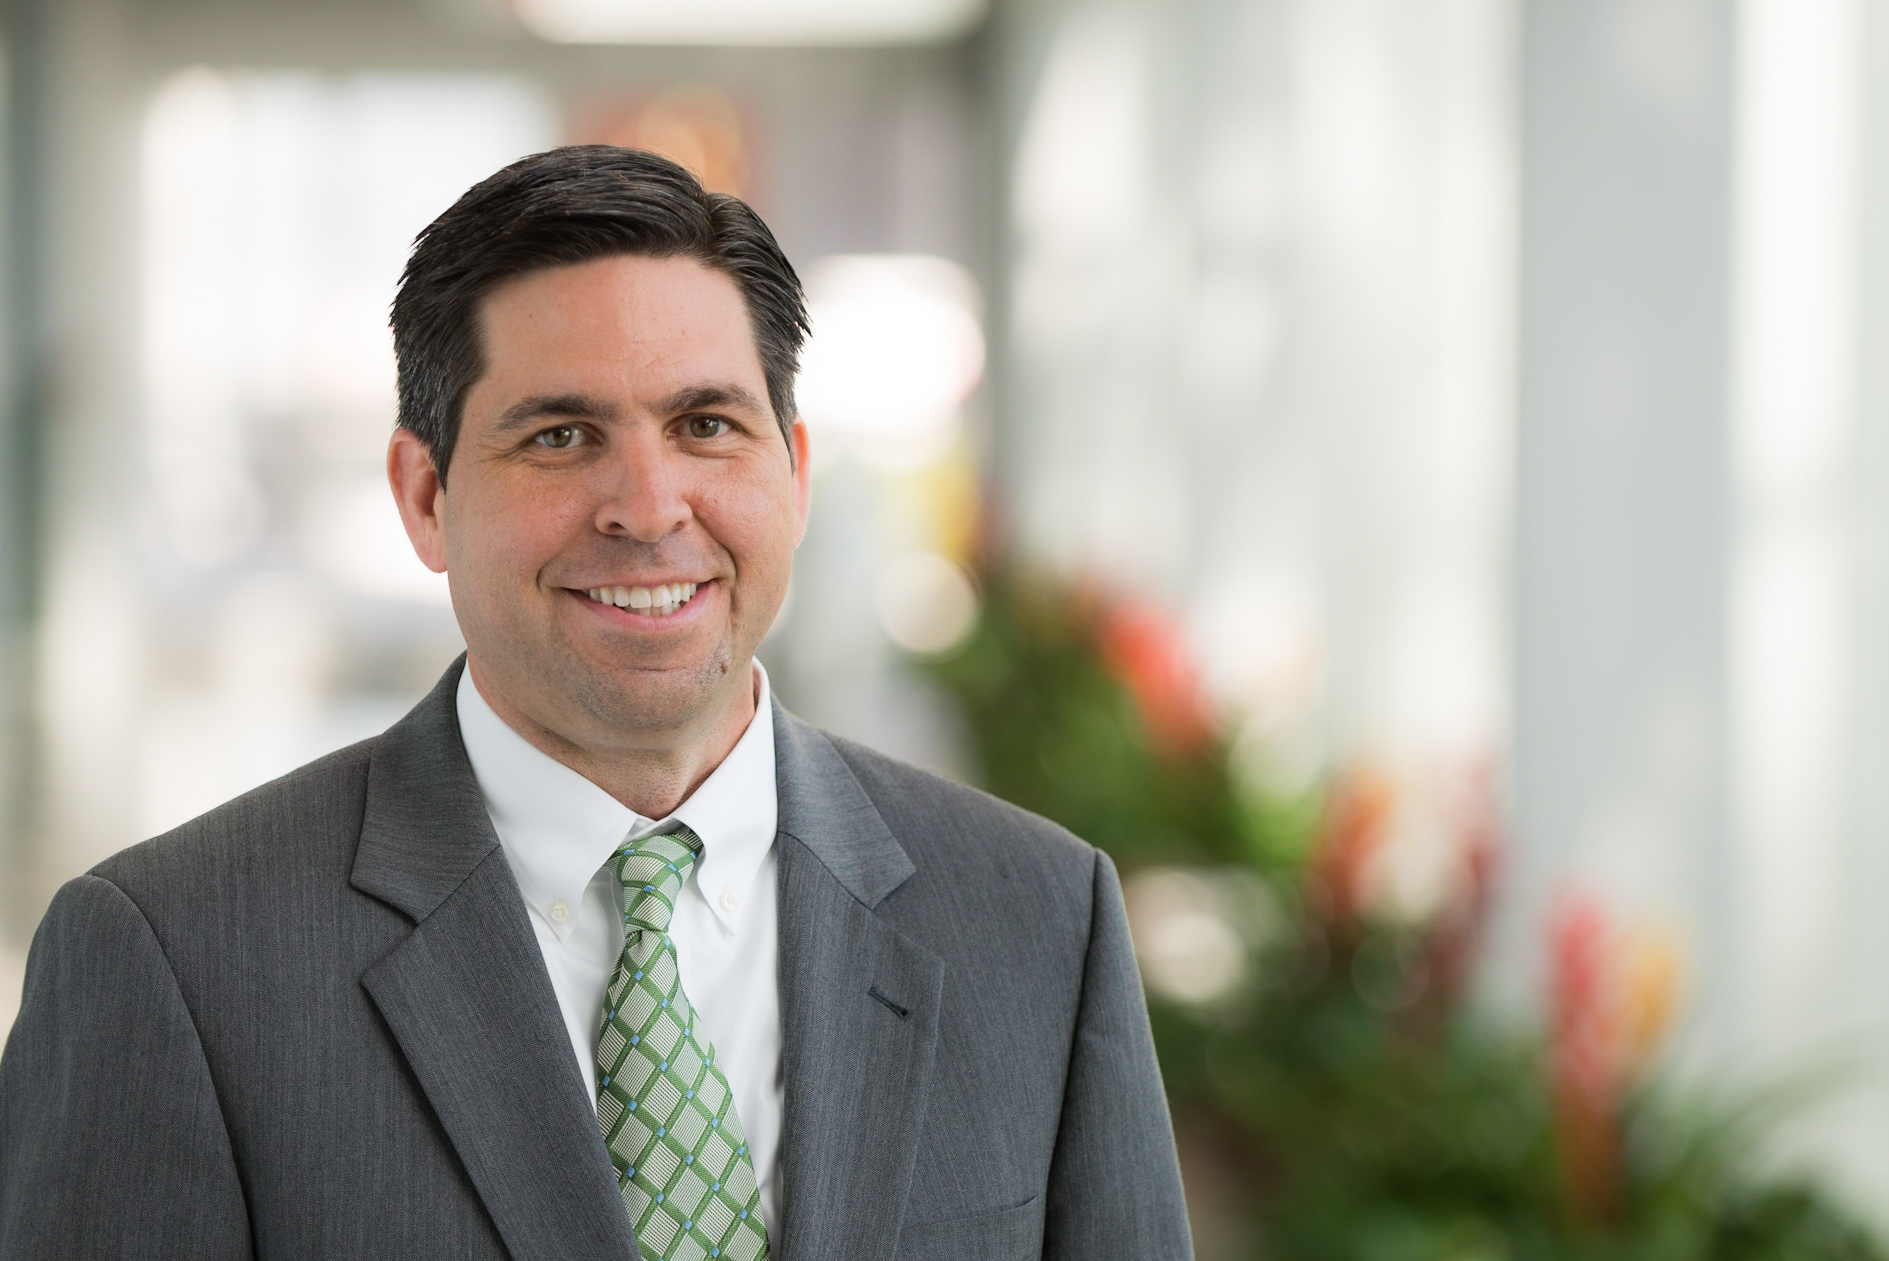 David Ottati serves as CEO of the Florida Hospitals in Volusia and Flagler counties.